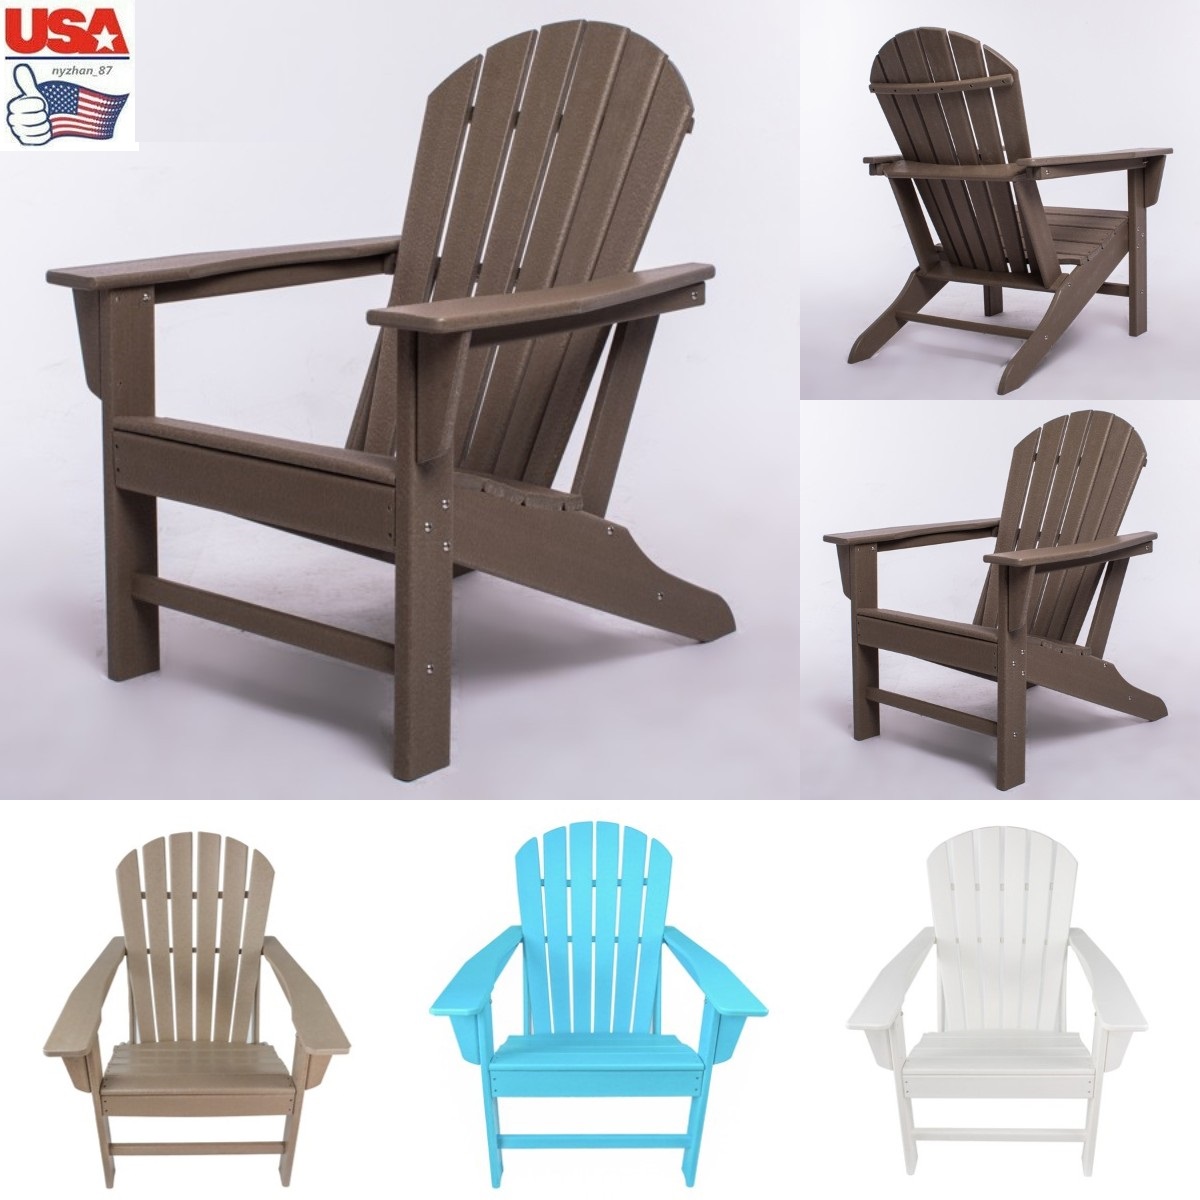 Adirondack Chair Resin, 350 lbs Capacity Load,Patio Chair Lawn Chair Outdoor Adirondack Chairs Weather Resistant for Patio Deck Garden 33.07*31.1*36.4" HDPE Resin Wood,Dark Brown - image 1 of 8